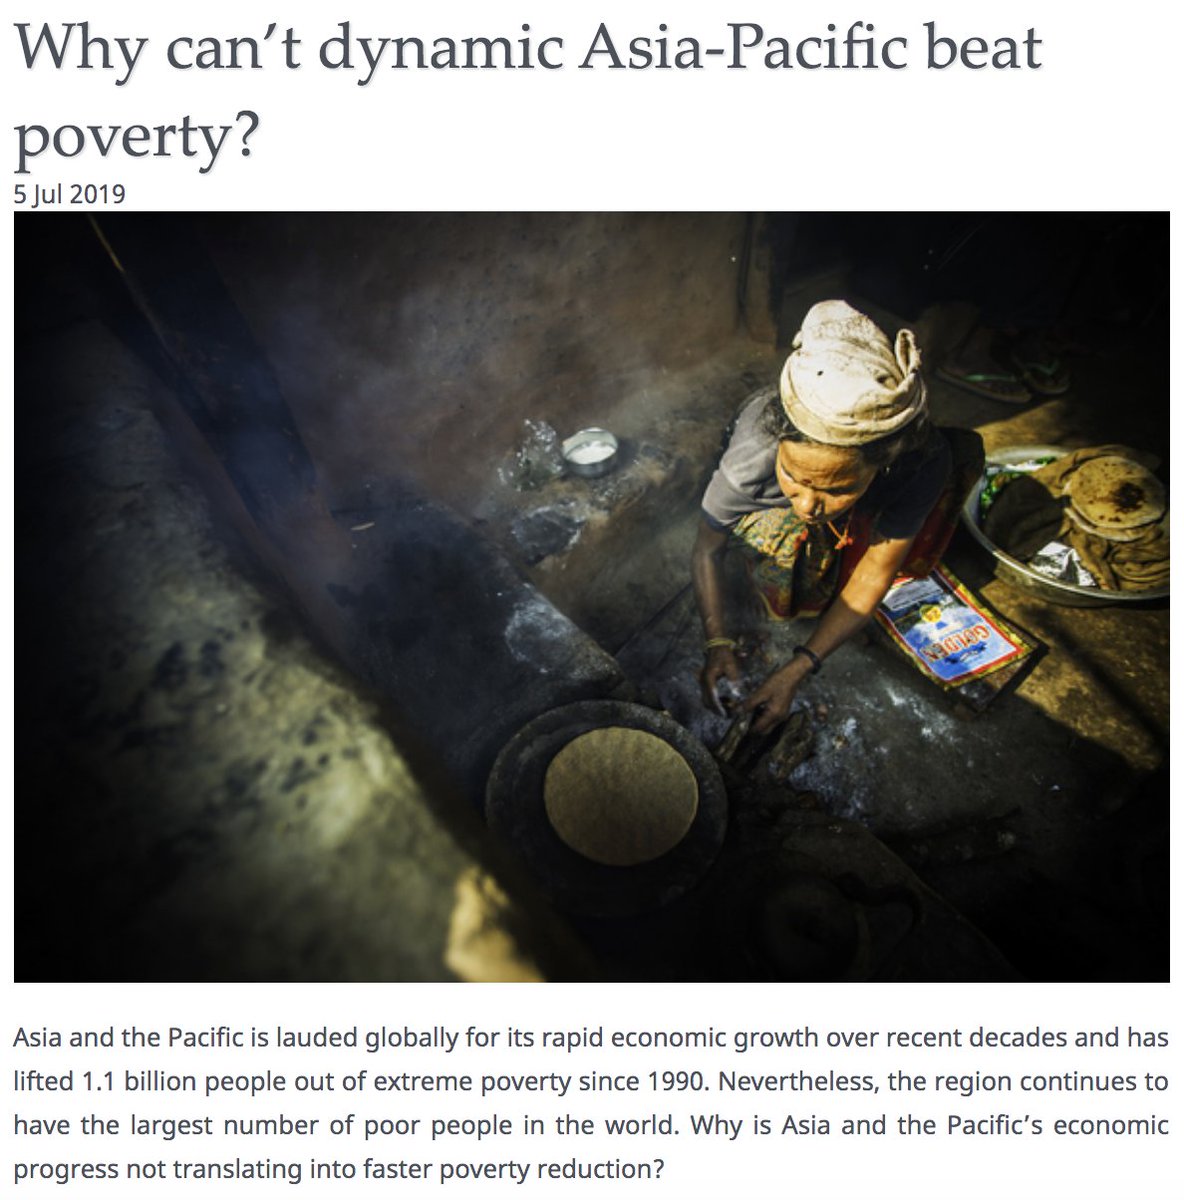 South and east Asia and the Pacific continue to be hotspots for global poverty, and people there are now facing additional threats from climate change and chronic food shortages  https://www.unescap.org/blog/why-cant-dynamic-asia-pacific-beat-poverty